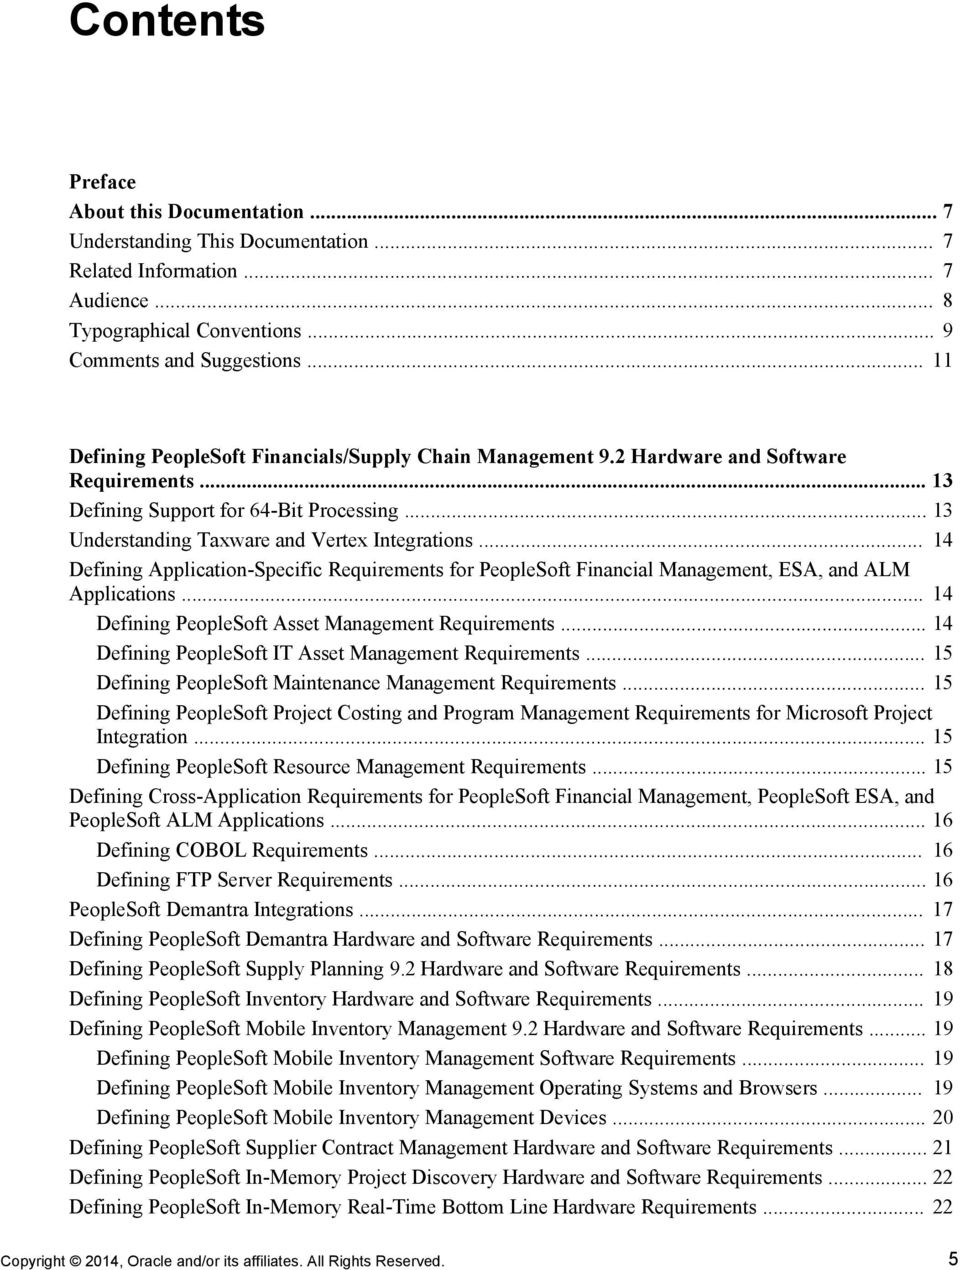 .. 14 Defining Application-Specific Requirements for PeopleSoft Financial Management, ESA, and ALM Applications... 14 Defining PeopleSoft Asset Management Requirements.